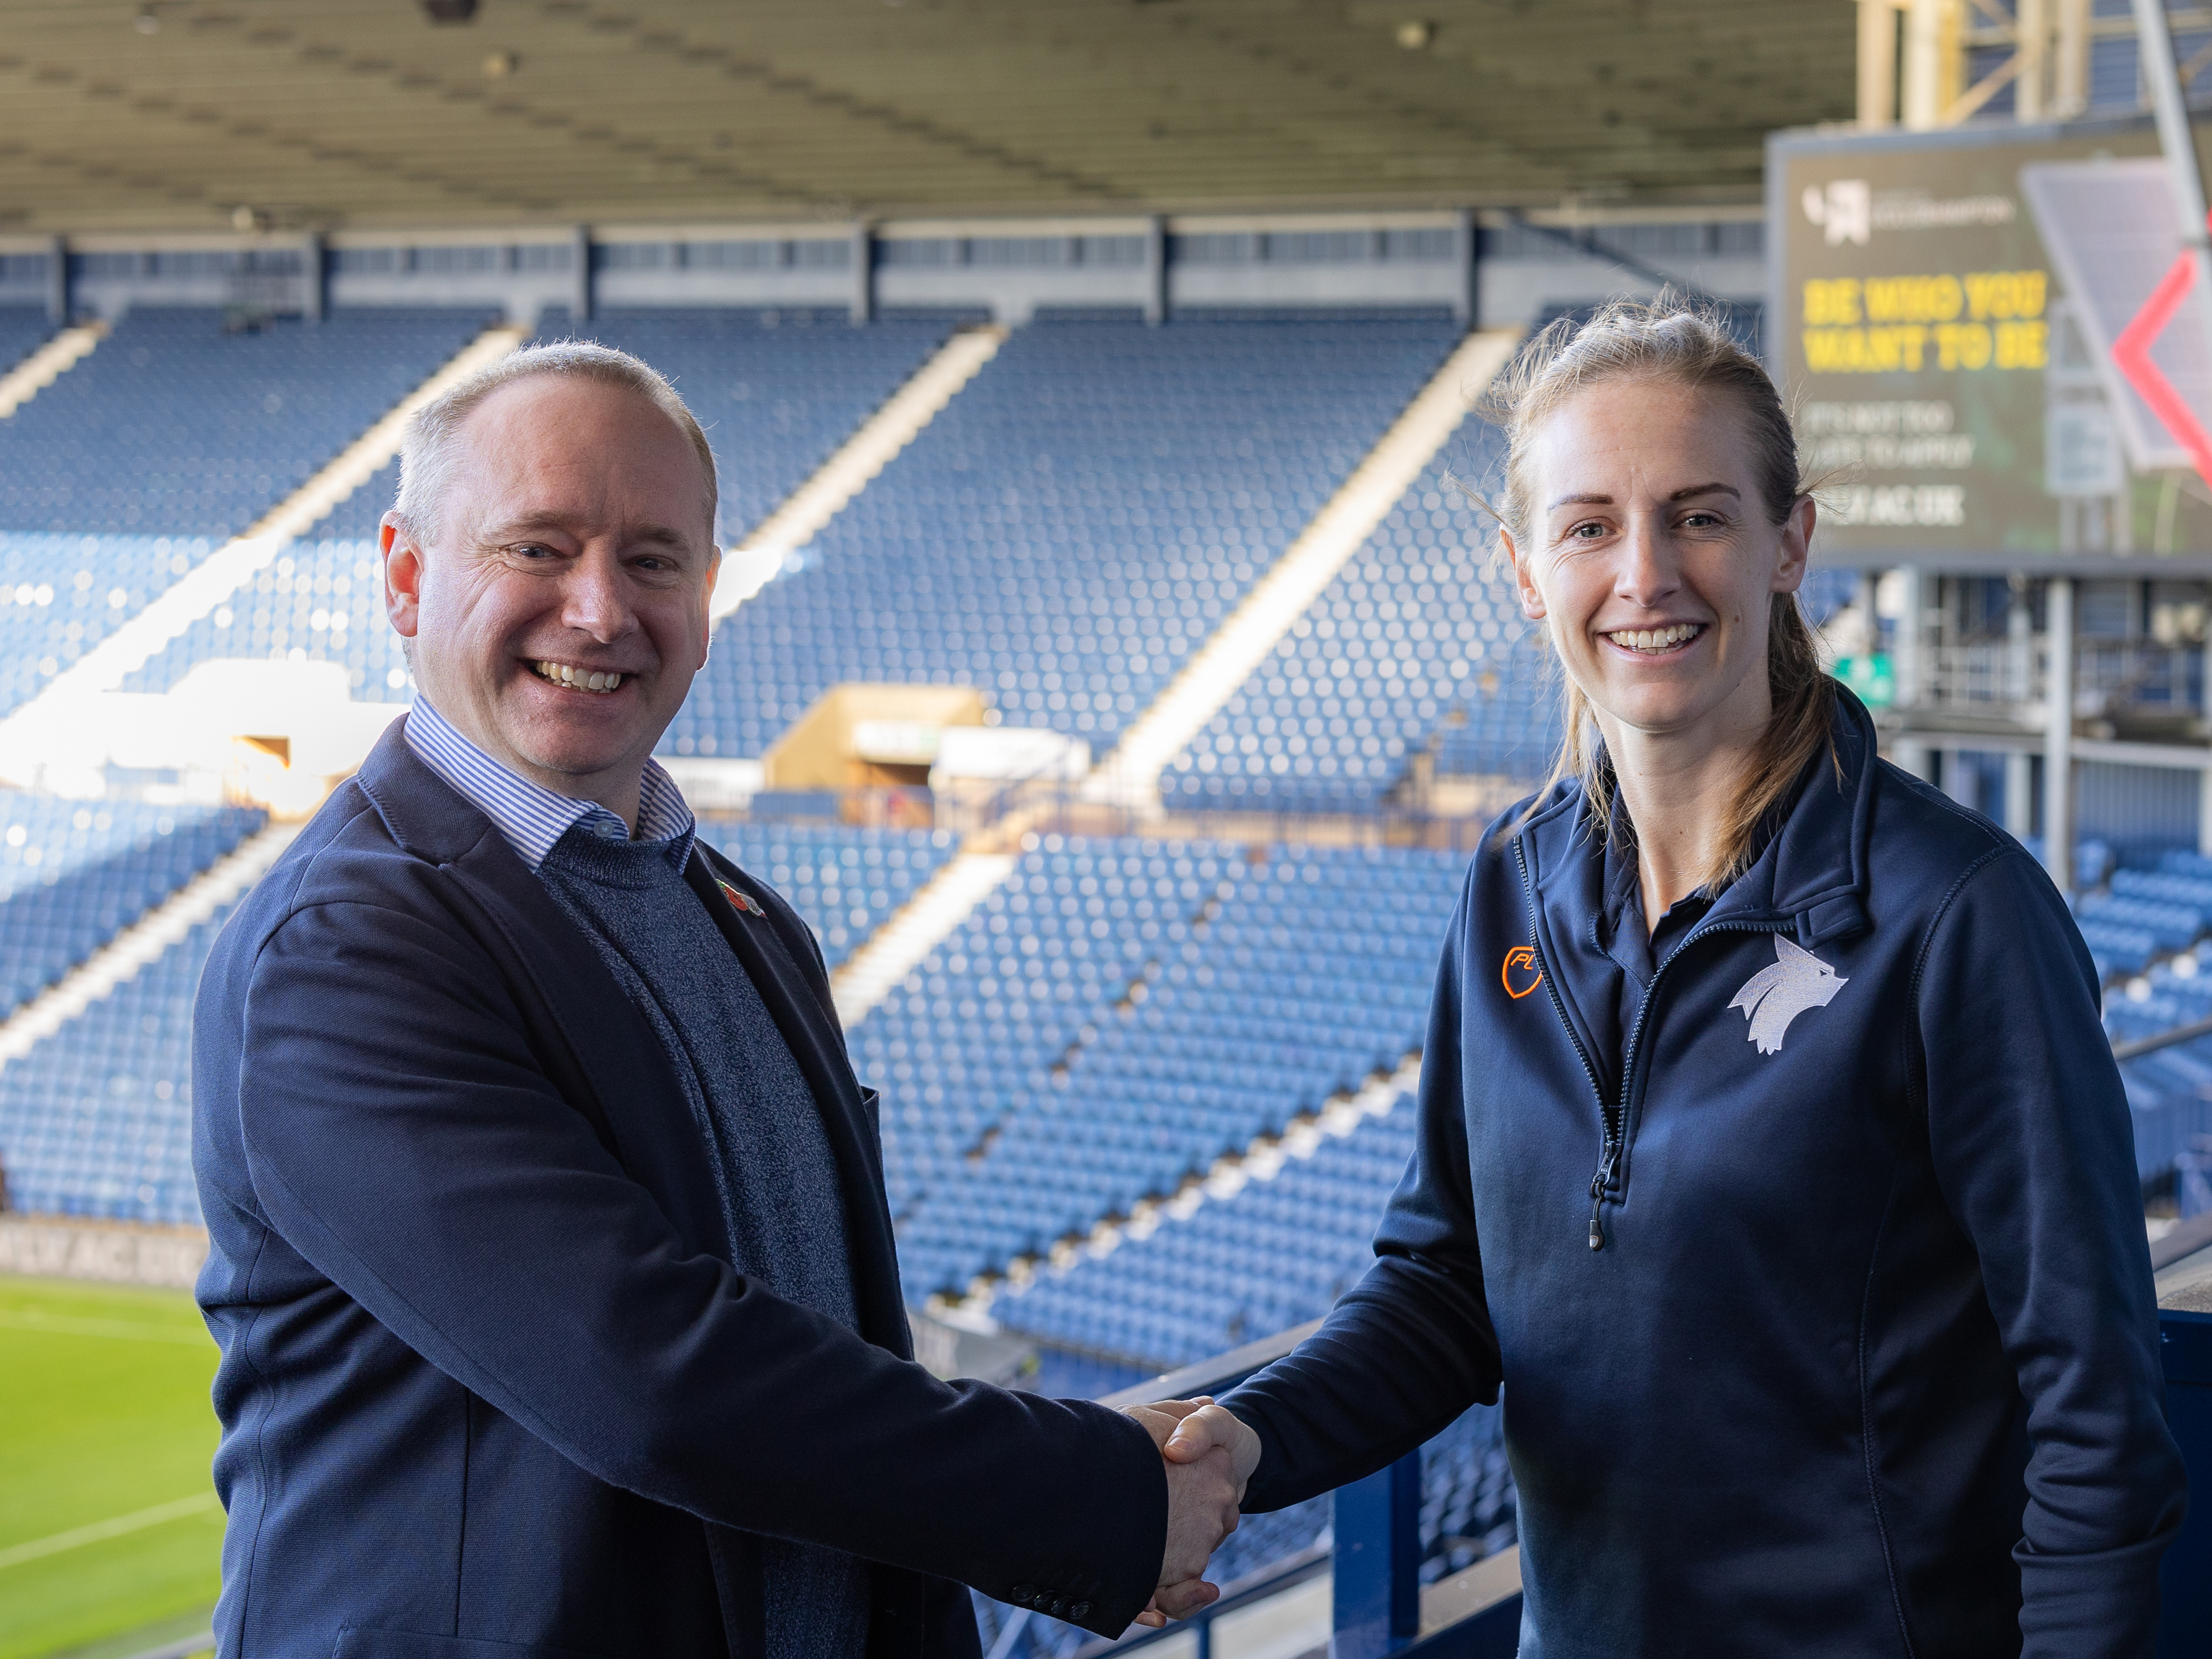 Albion Managing Director Mark Miles shakes hands with Kerys Harrop, former Lioness and Football Coaching and Performance Lecturer at the University of Wolverhampton